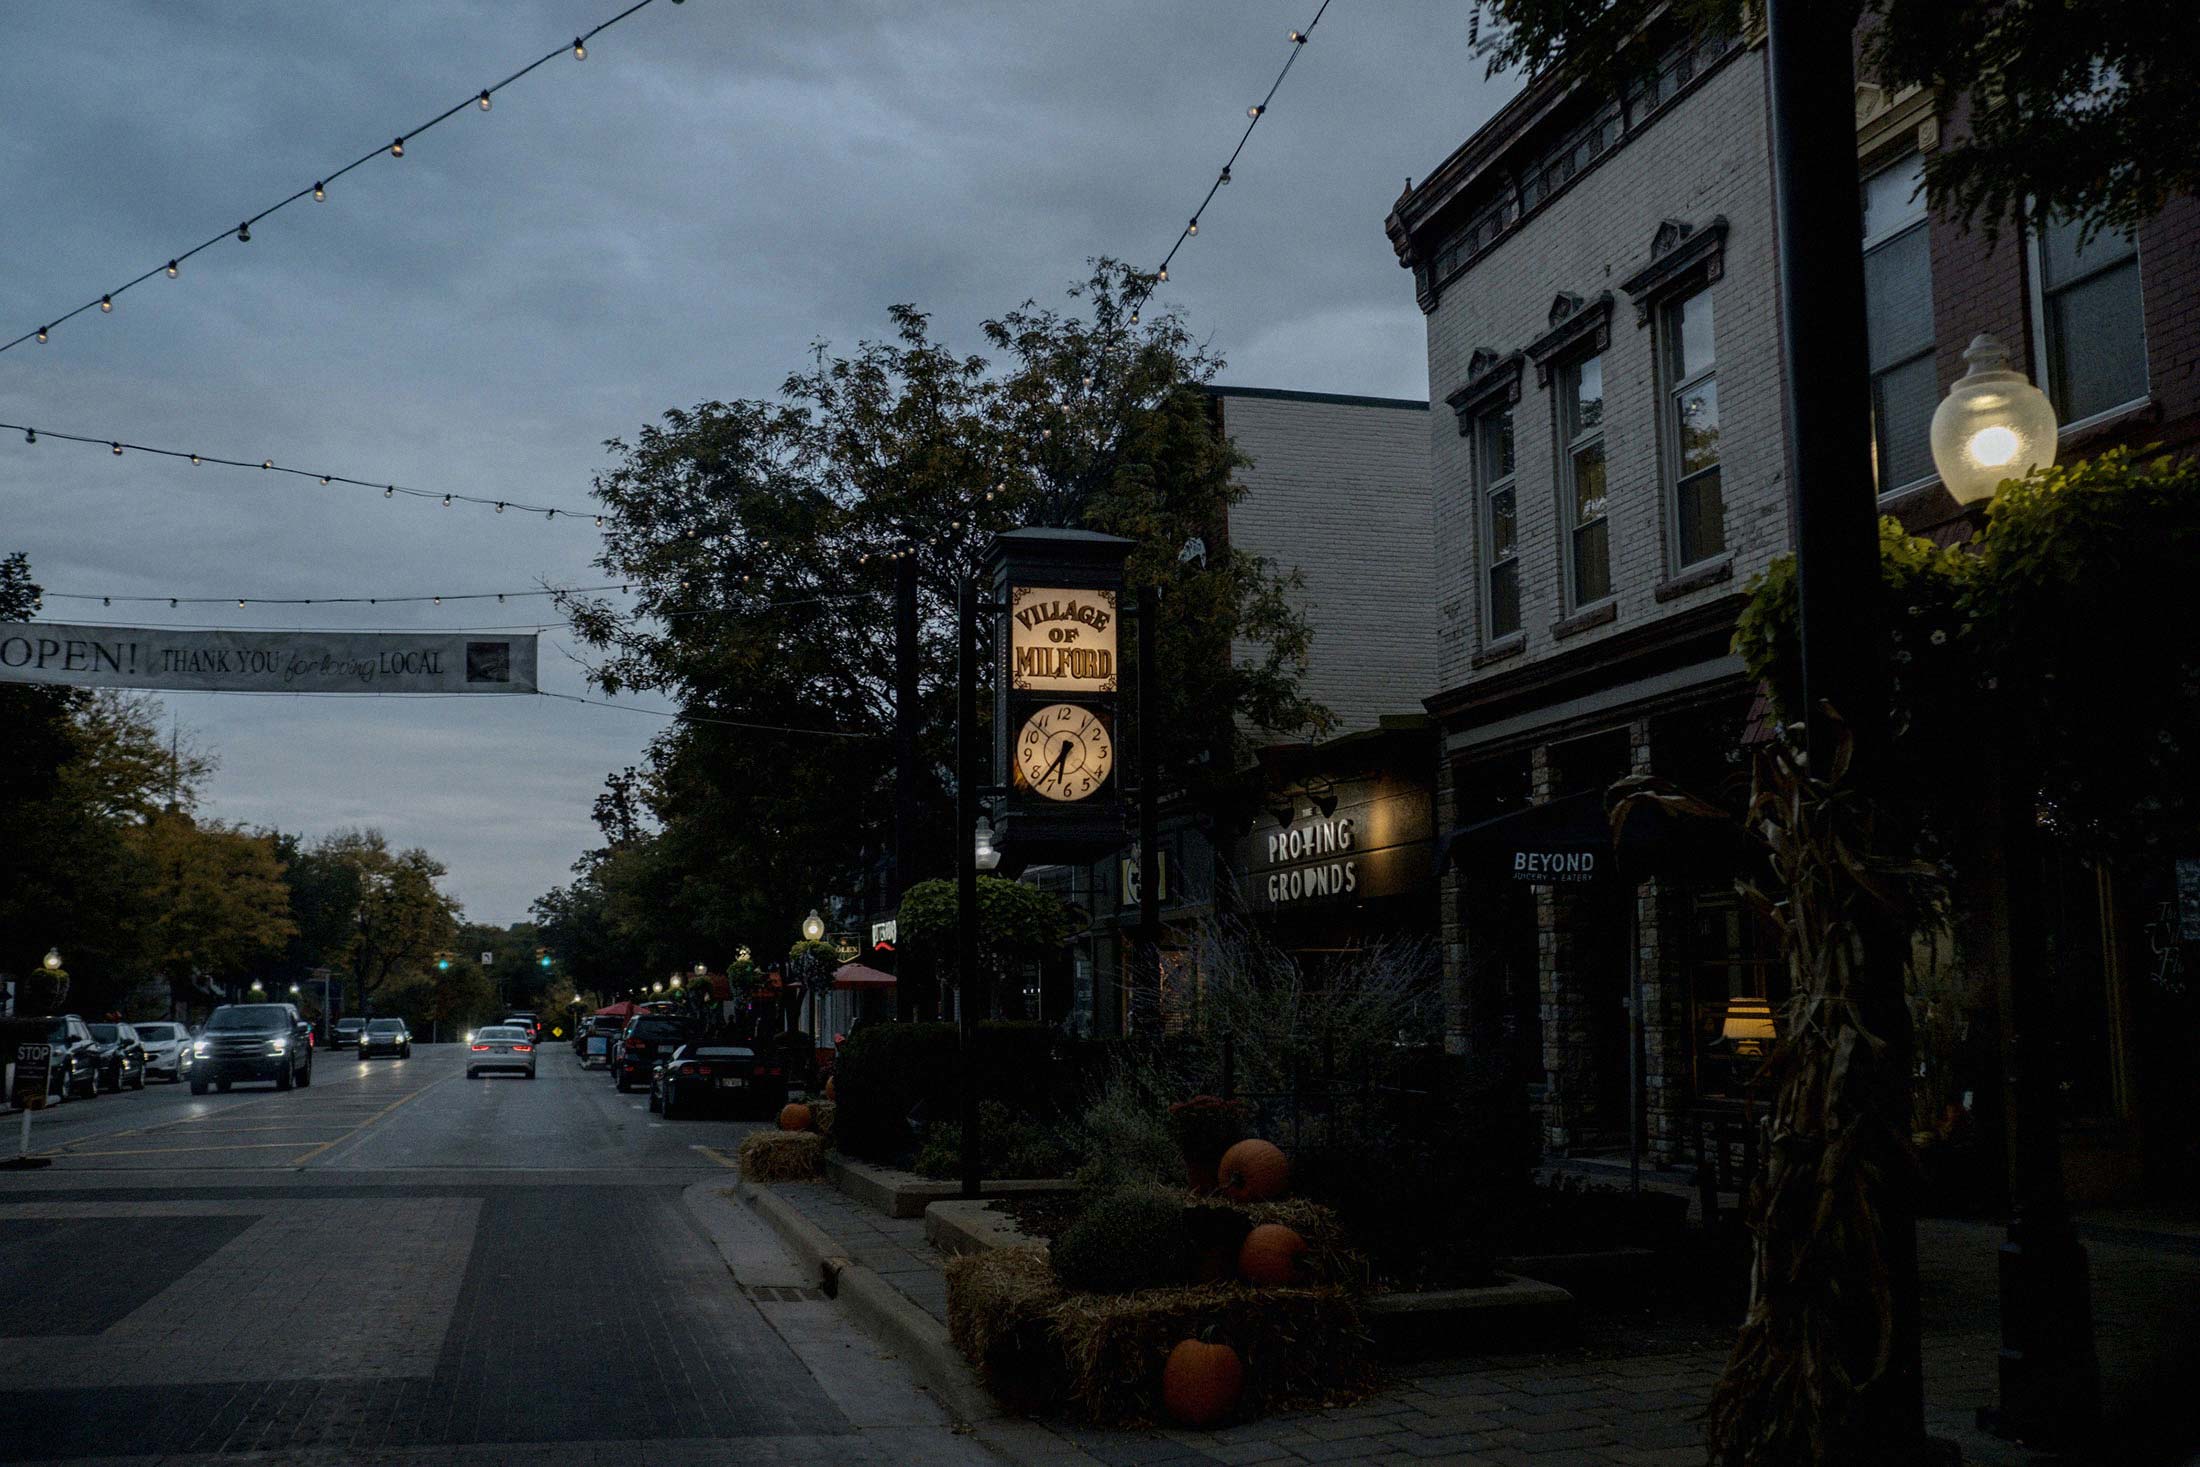 The Village of Milford clock lights up as the sun sets in downtown Milford, Mich.